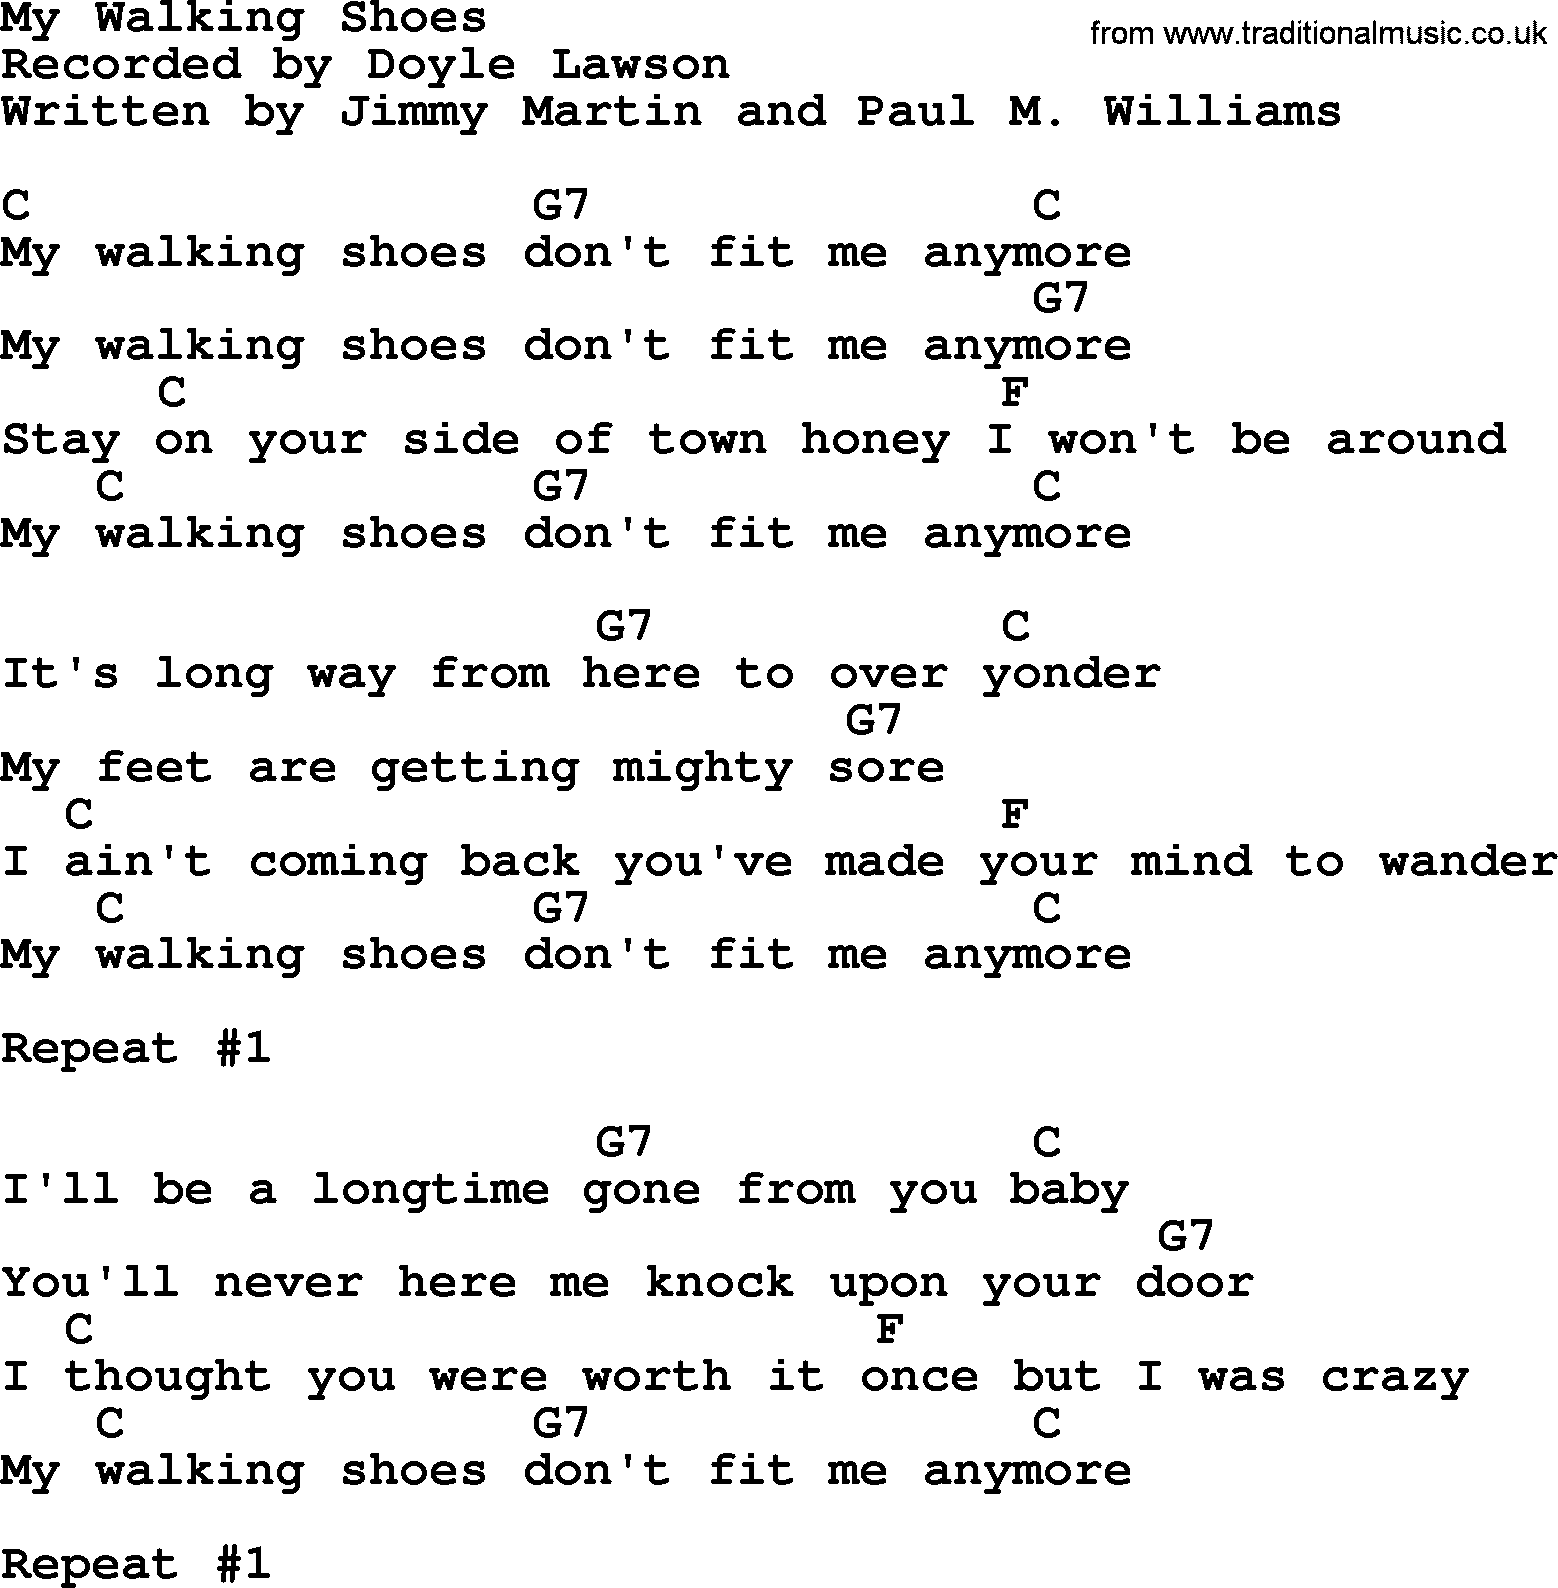 Bluegrass song: My Walking Shoes, lyrics and chords